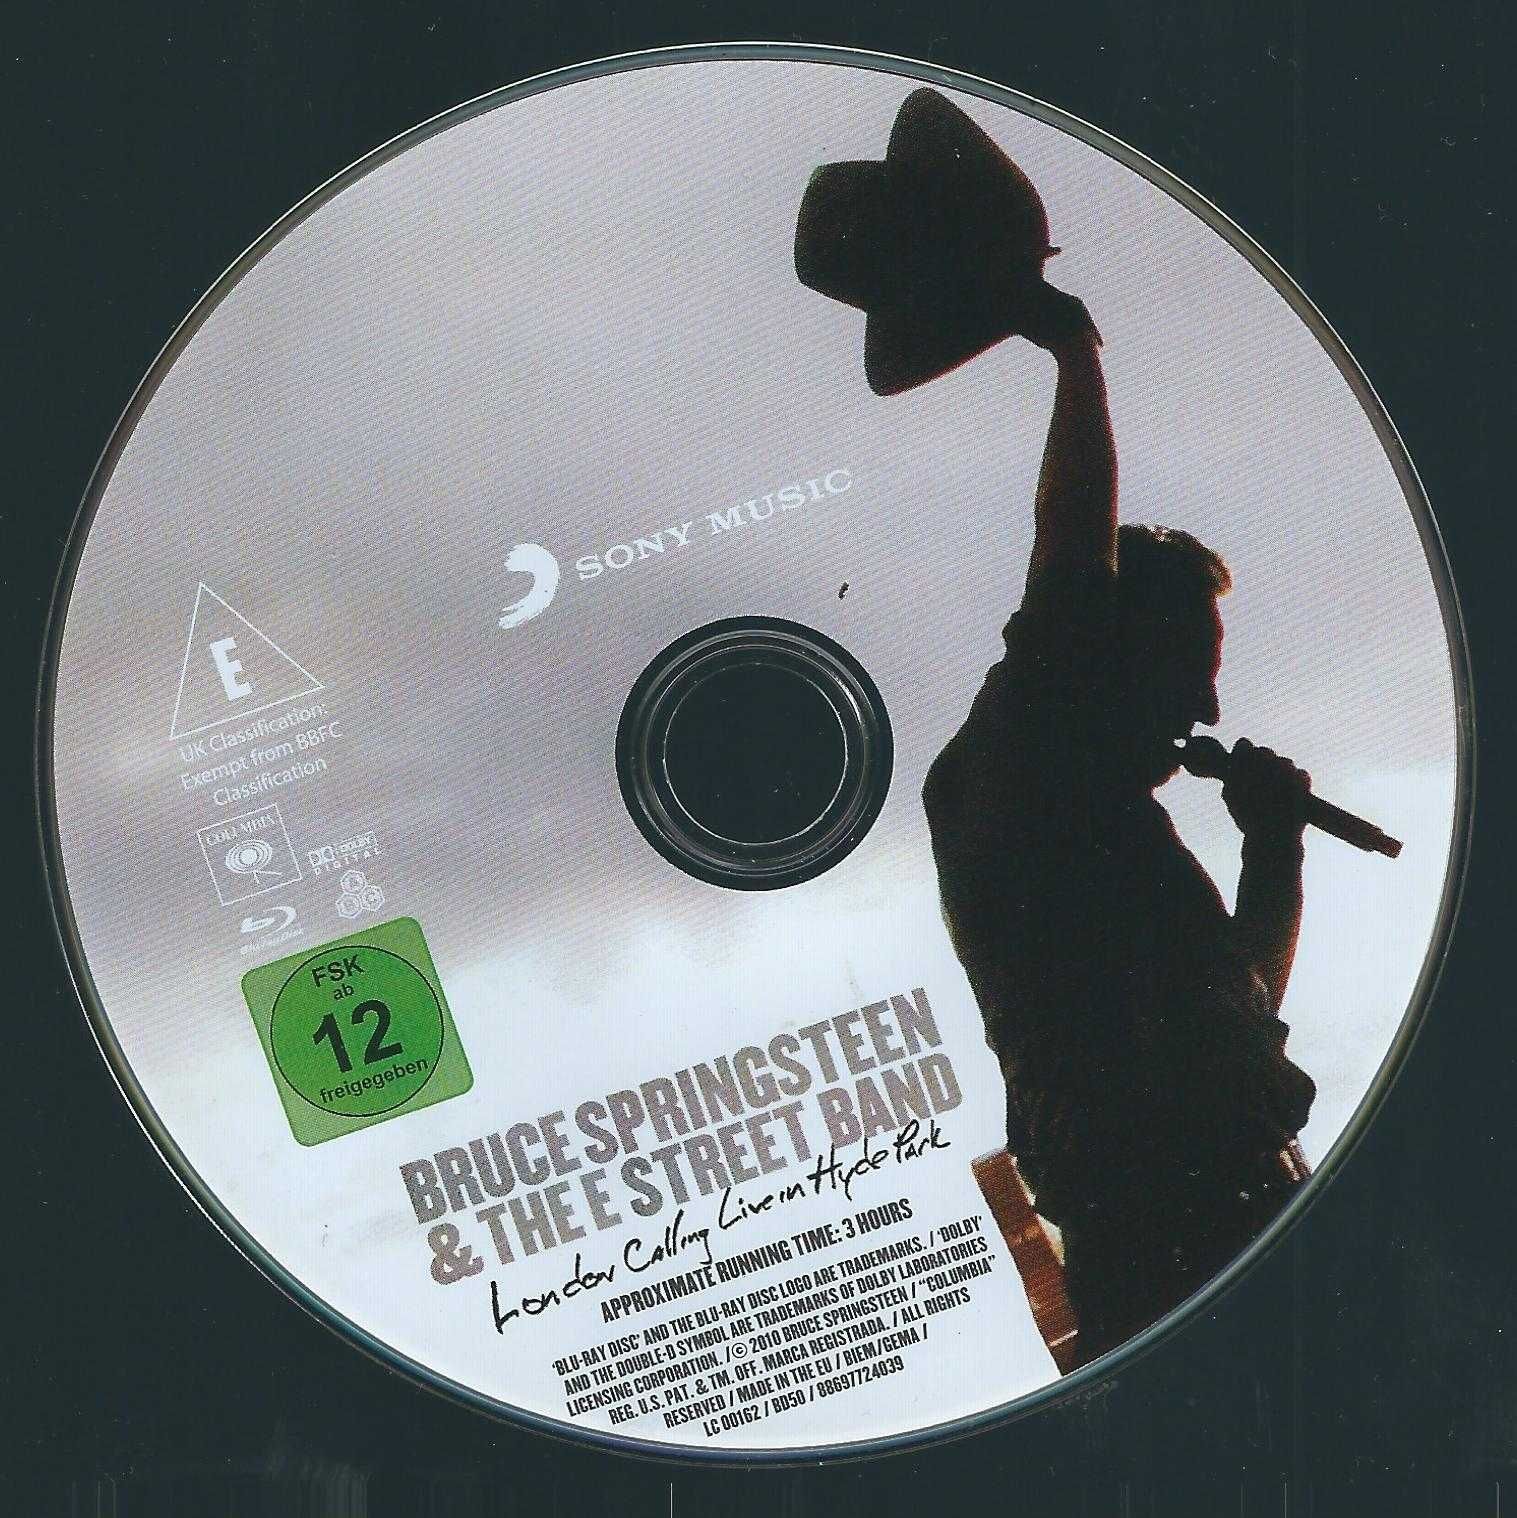 Blu-Ray Bruce Springsteen & The E Street Band - London Calling (2010)